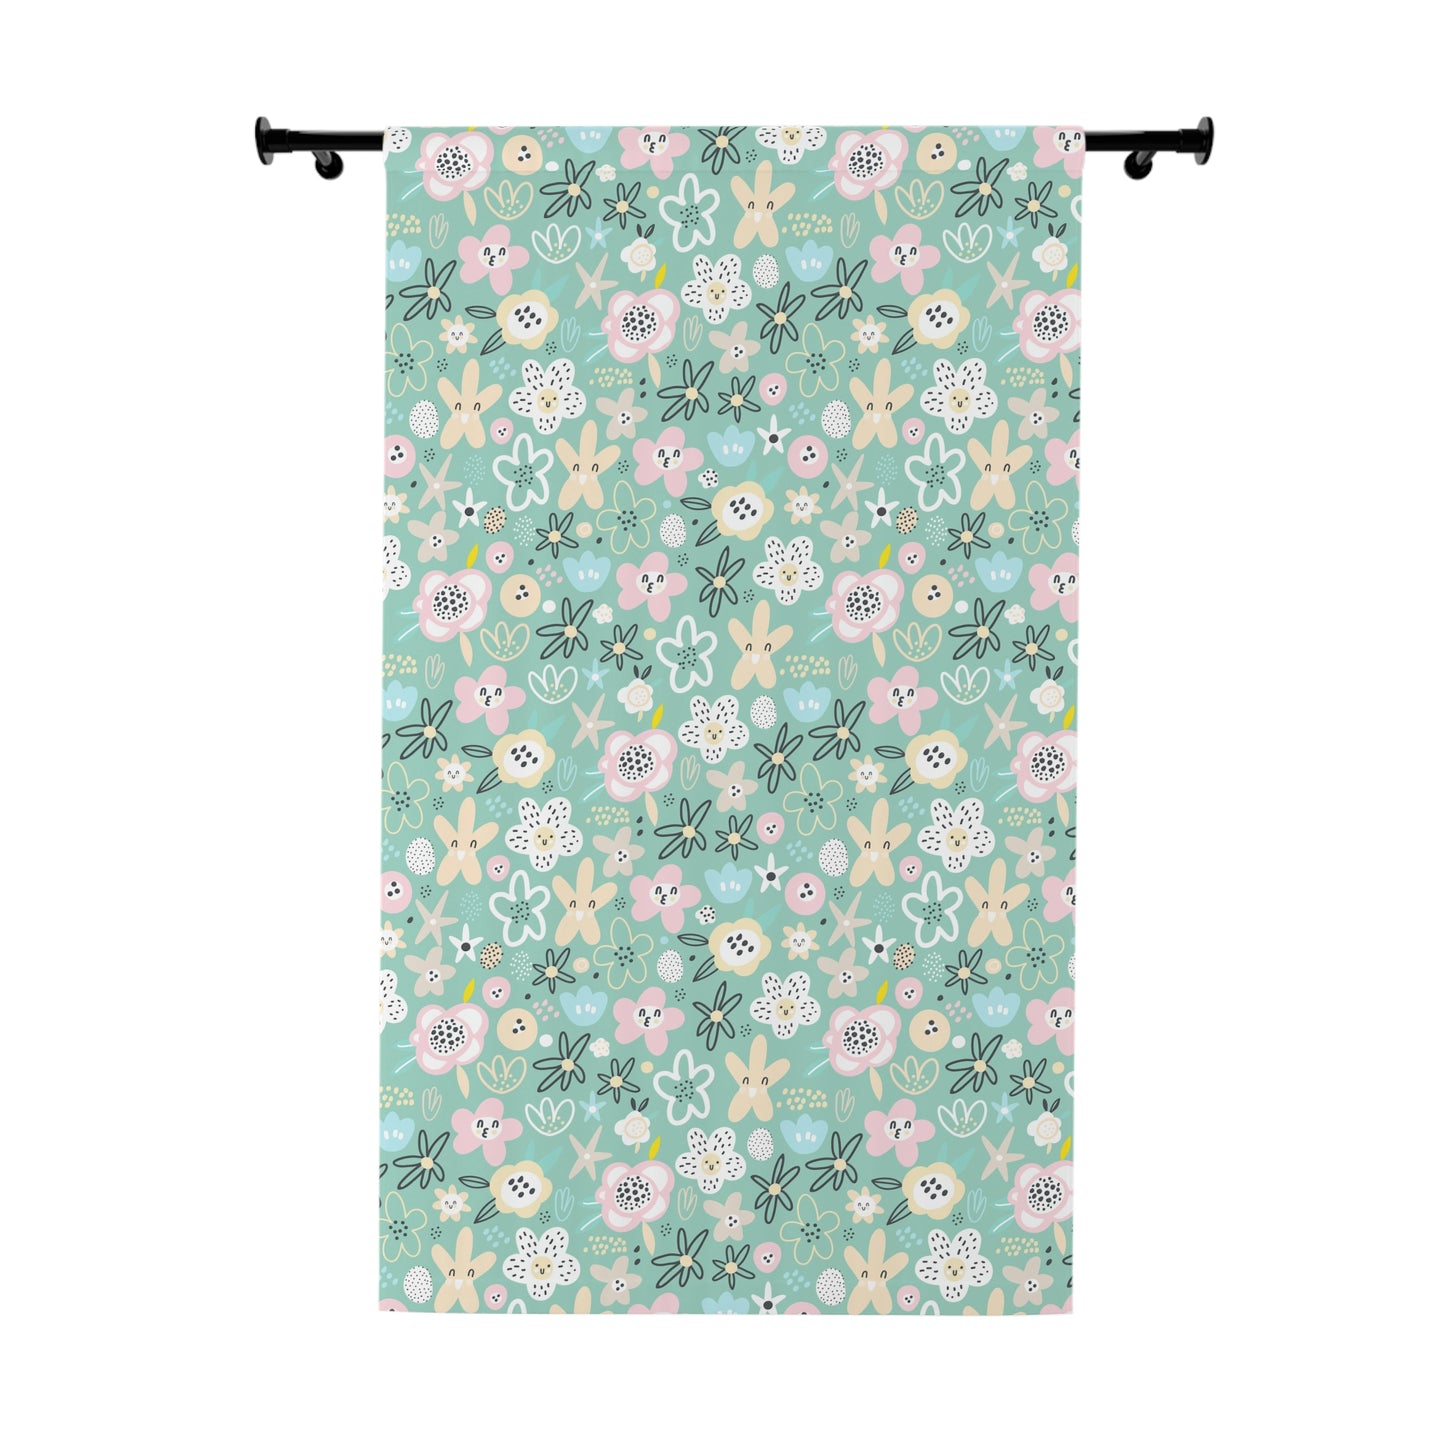 Abstract Flowers Window Curtain Panel 1 Piece)